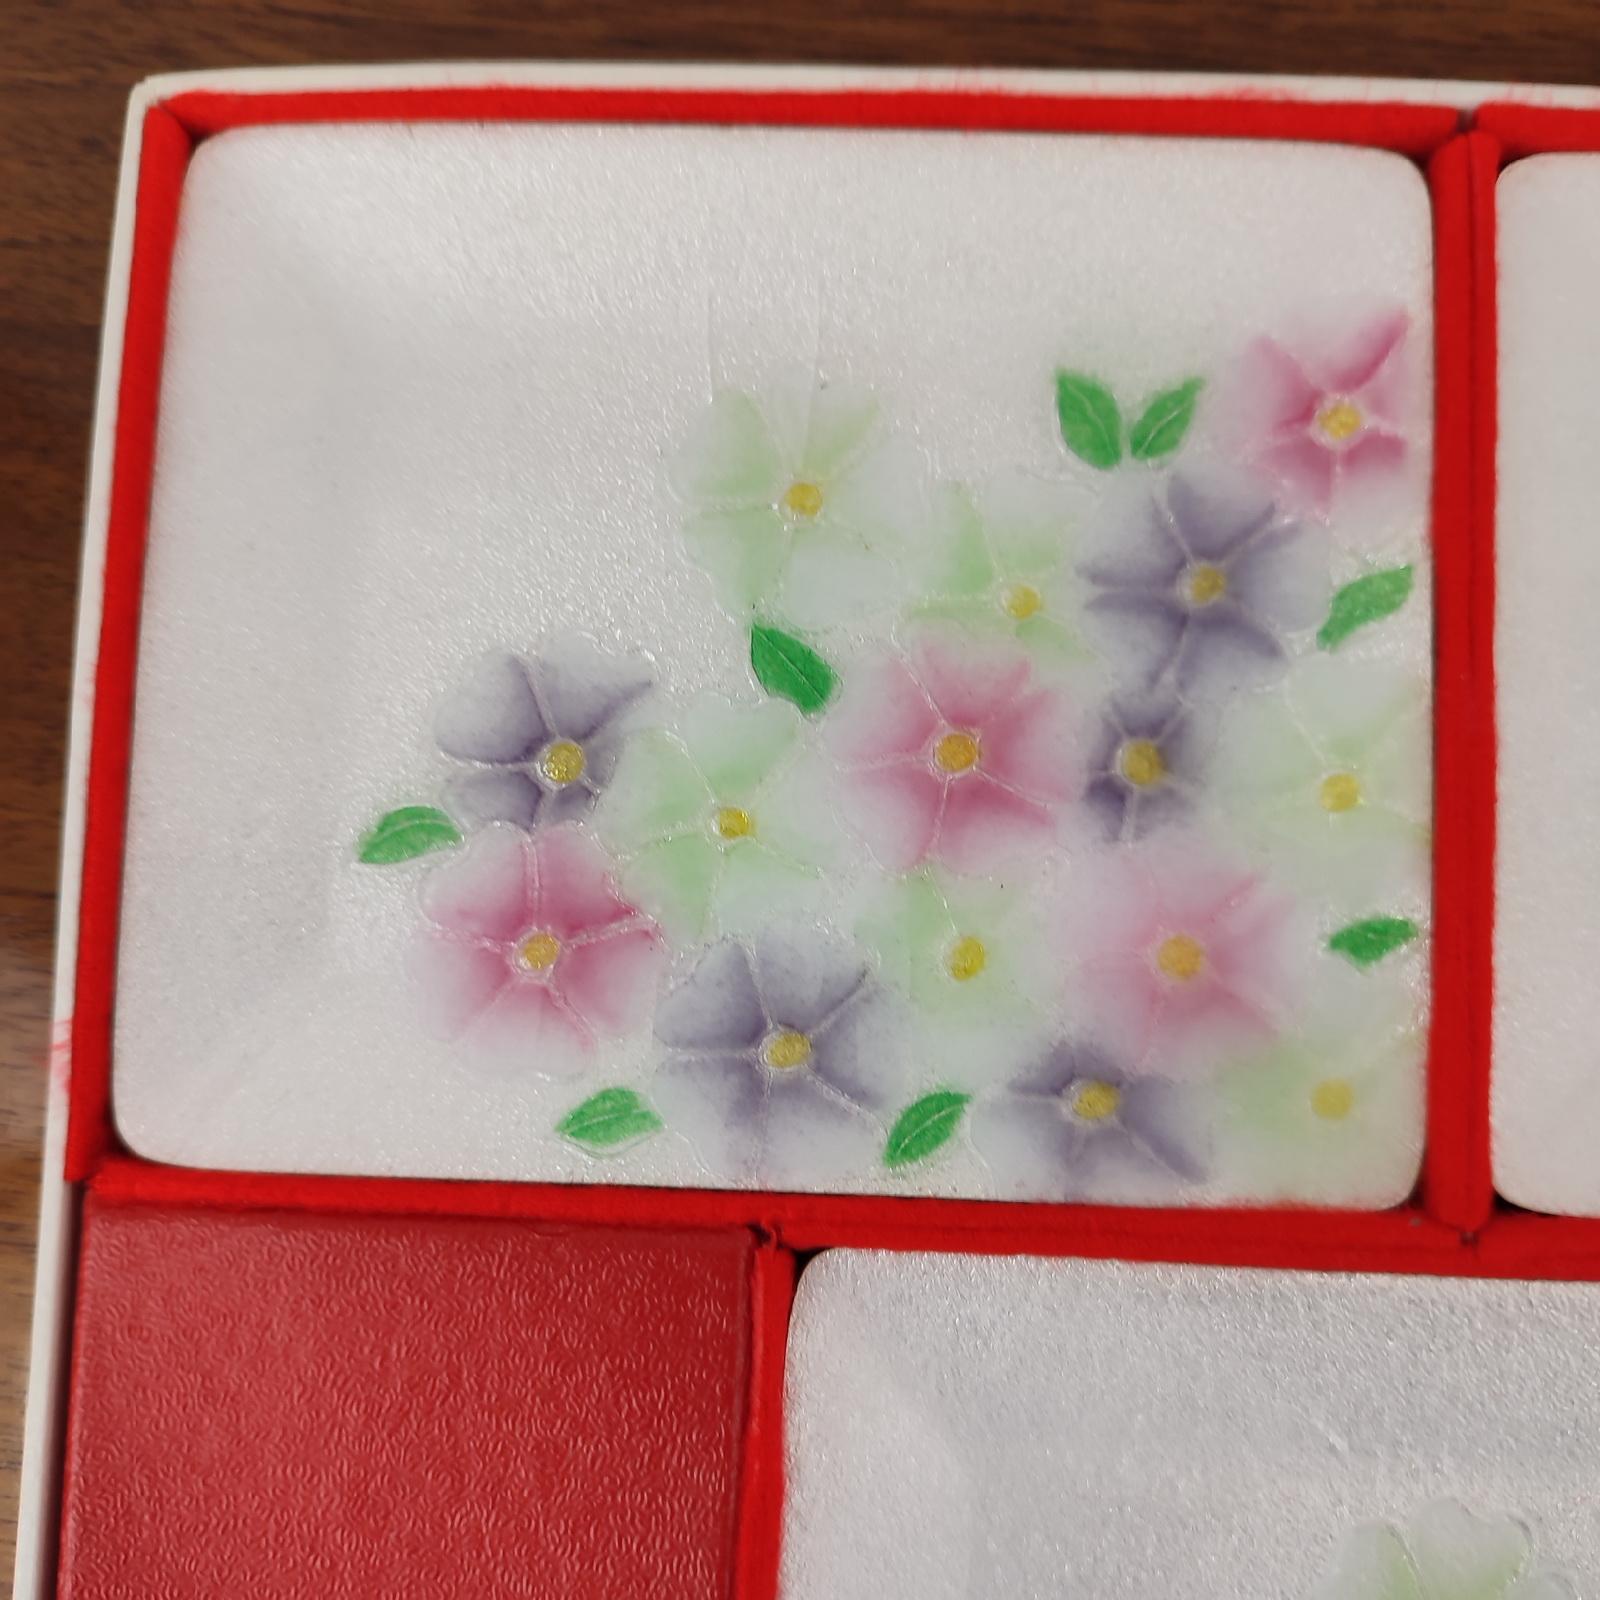 Mid-20th Century Vintage Japanese Cloisonné Set of 5 Pcs Sushi Dishes with Clematis Design For Sale